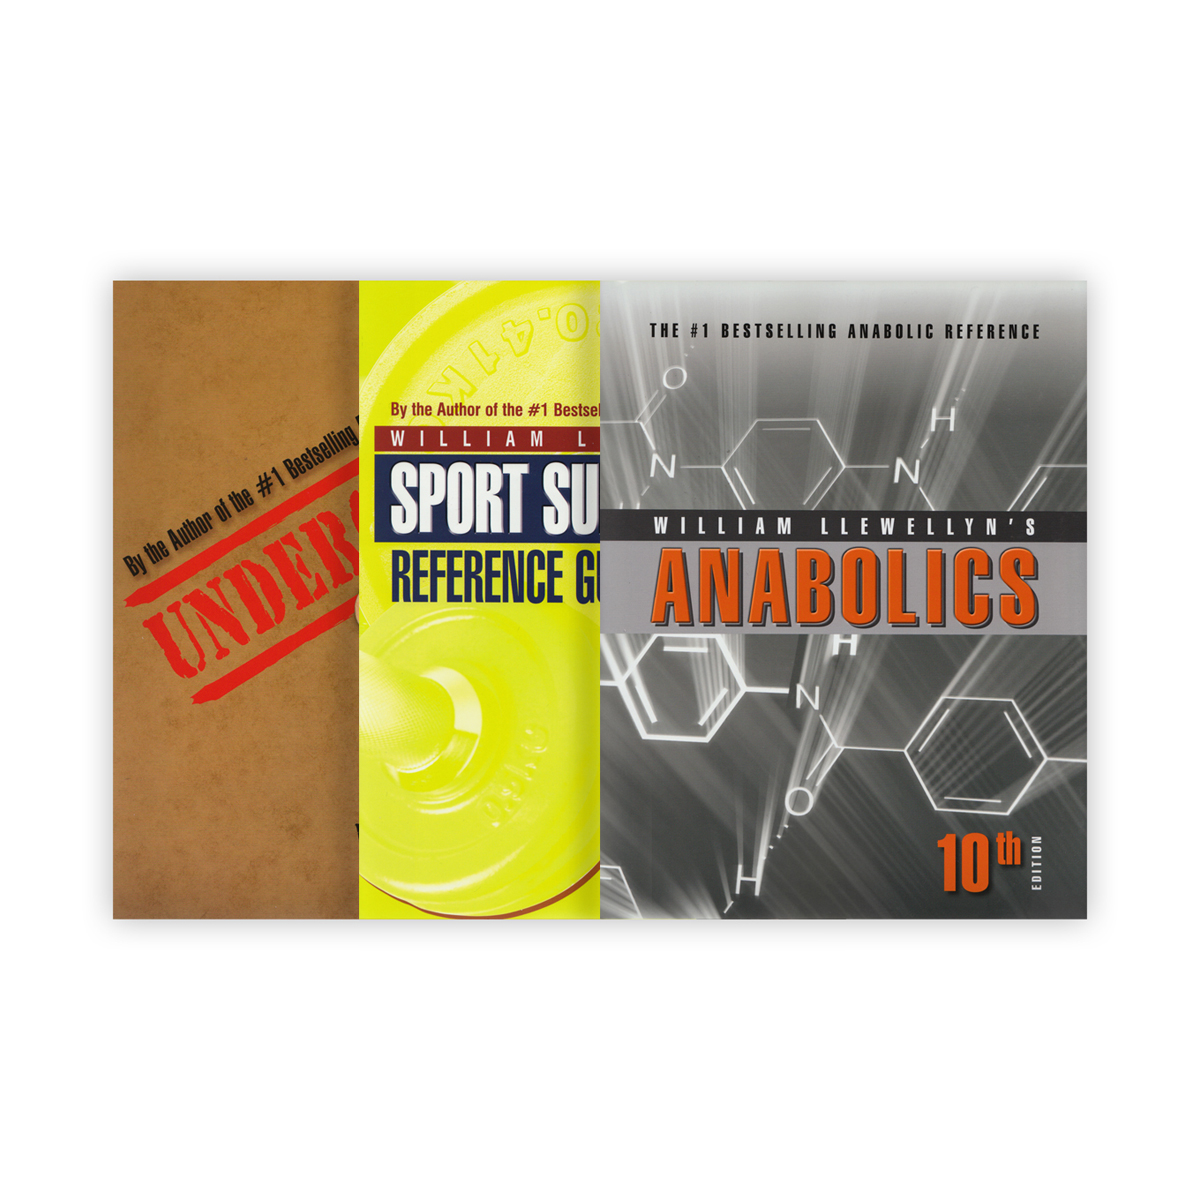 William Llewellyn's Anabolics and Sport Supplements - 3 book set